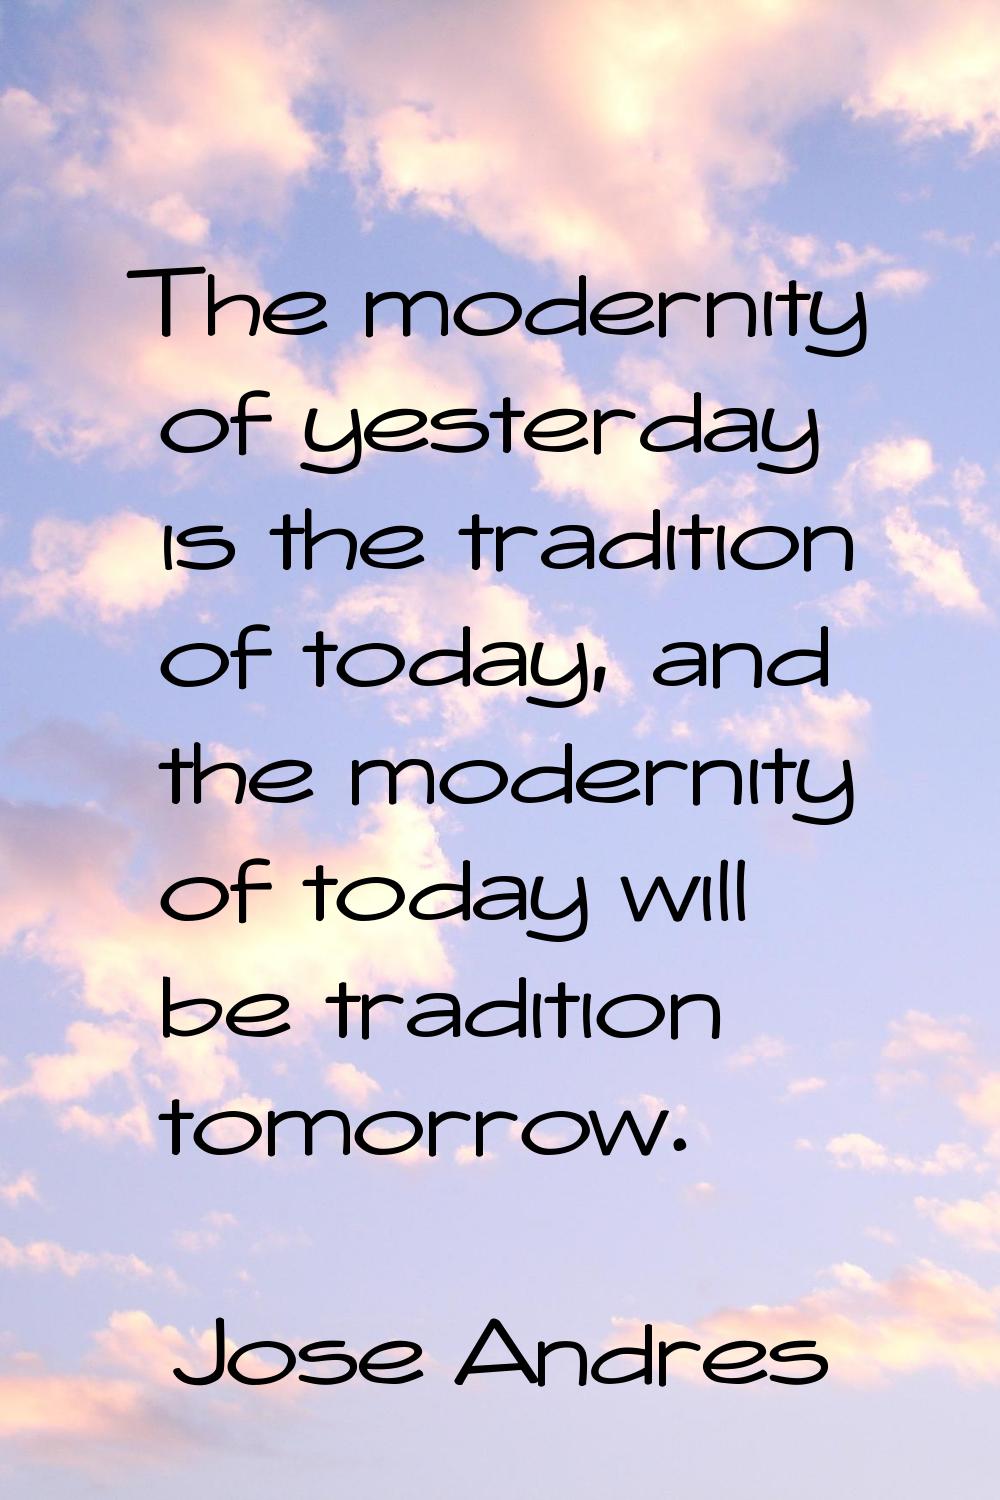 The modernity of yesterday is the tradition of today, and the modernity of today will be tradition 